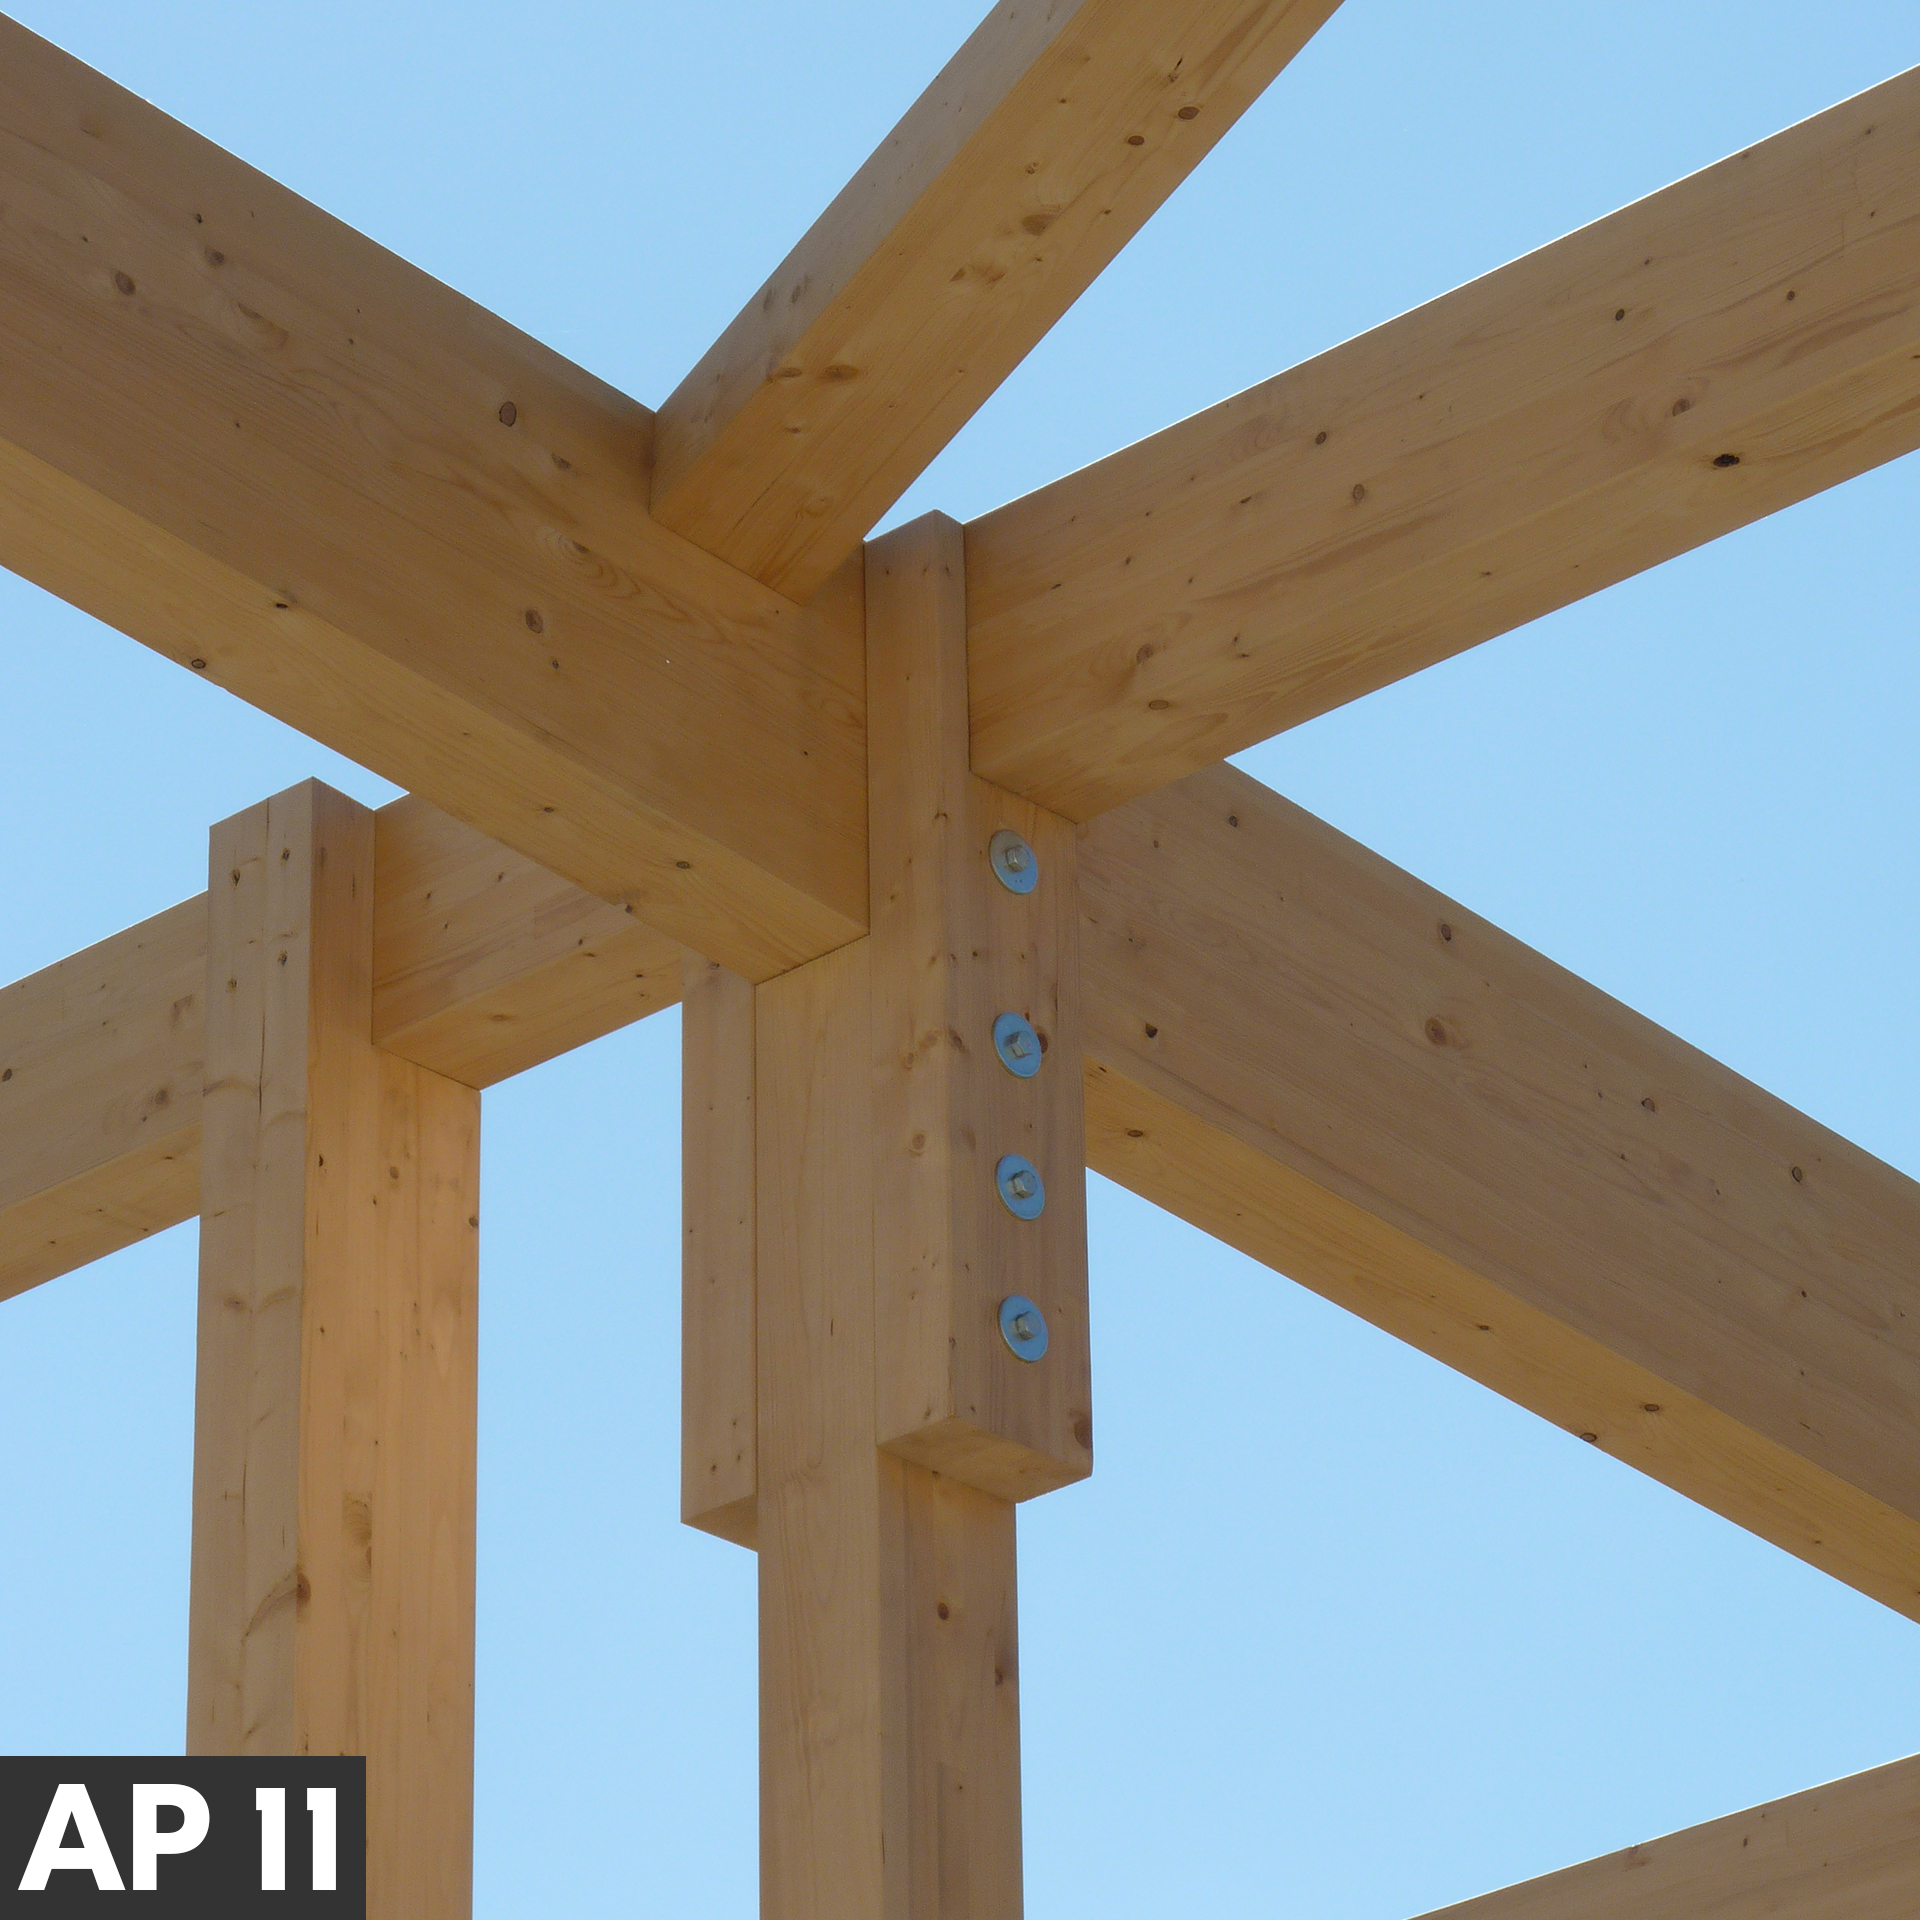 Associated Project 11 - Imperfection Measurements on Timber Members at Risk of Buckling